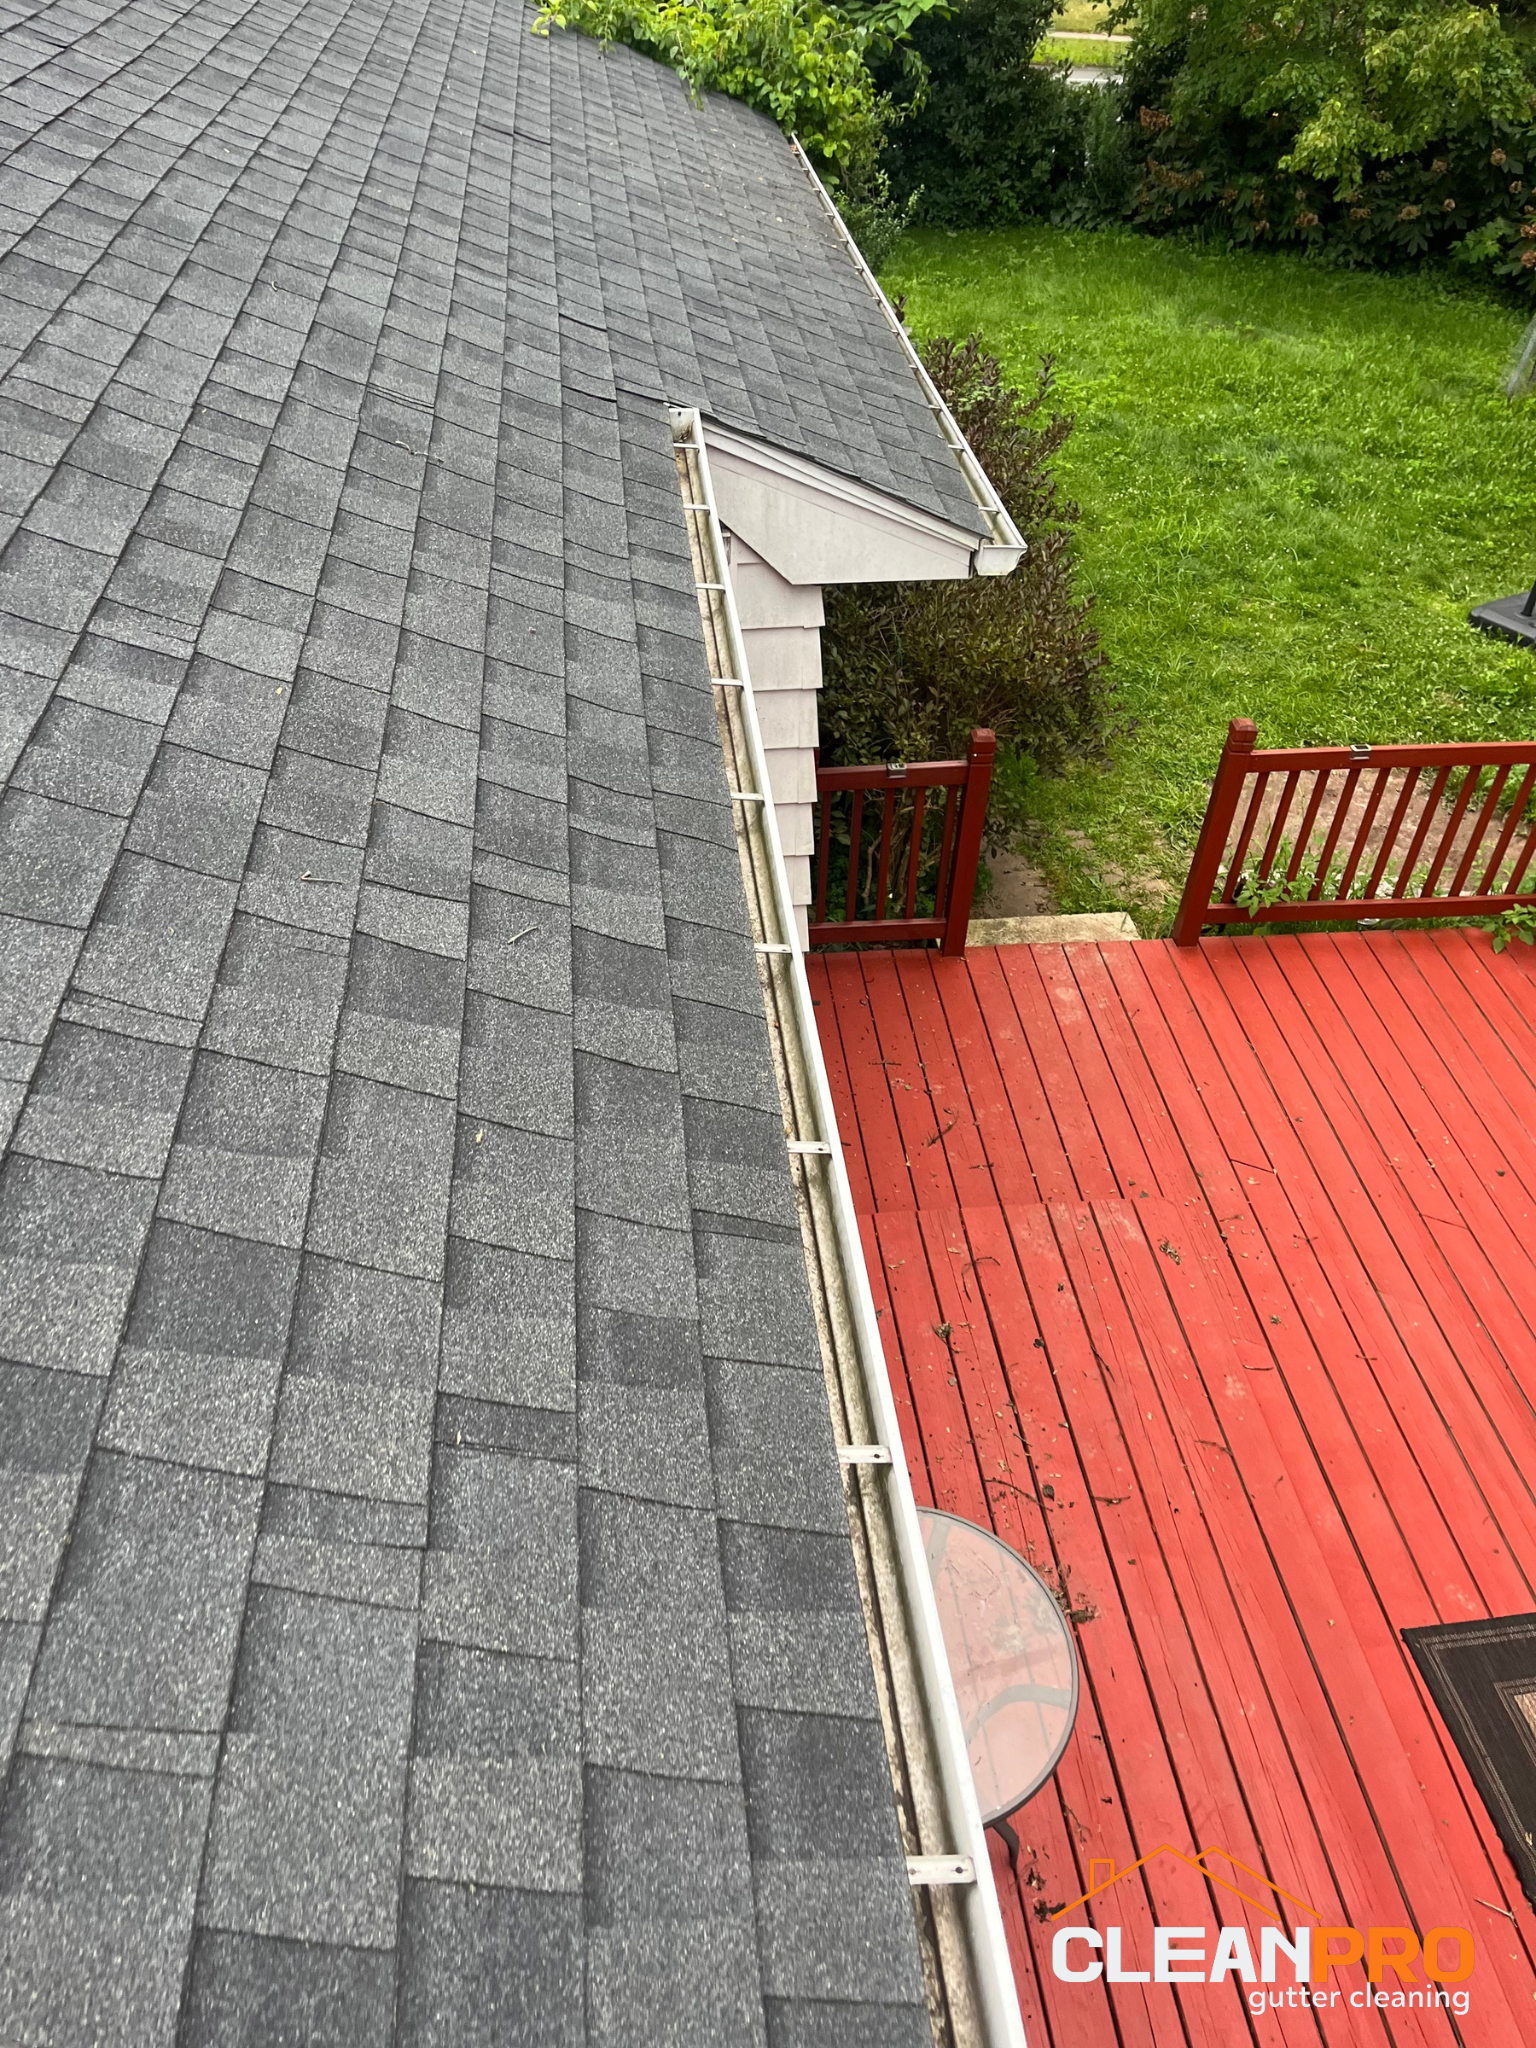 Quality Gutter Cleaning in Chicago IL